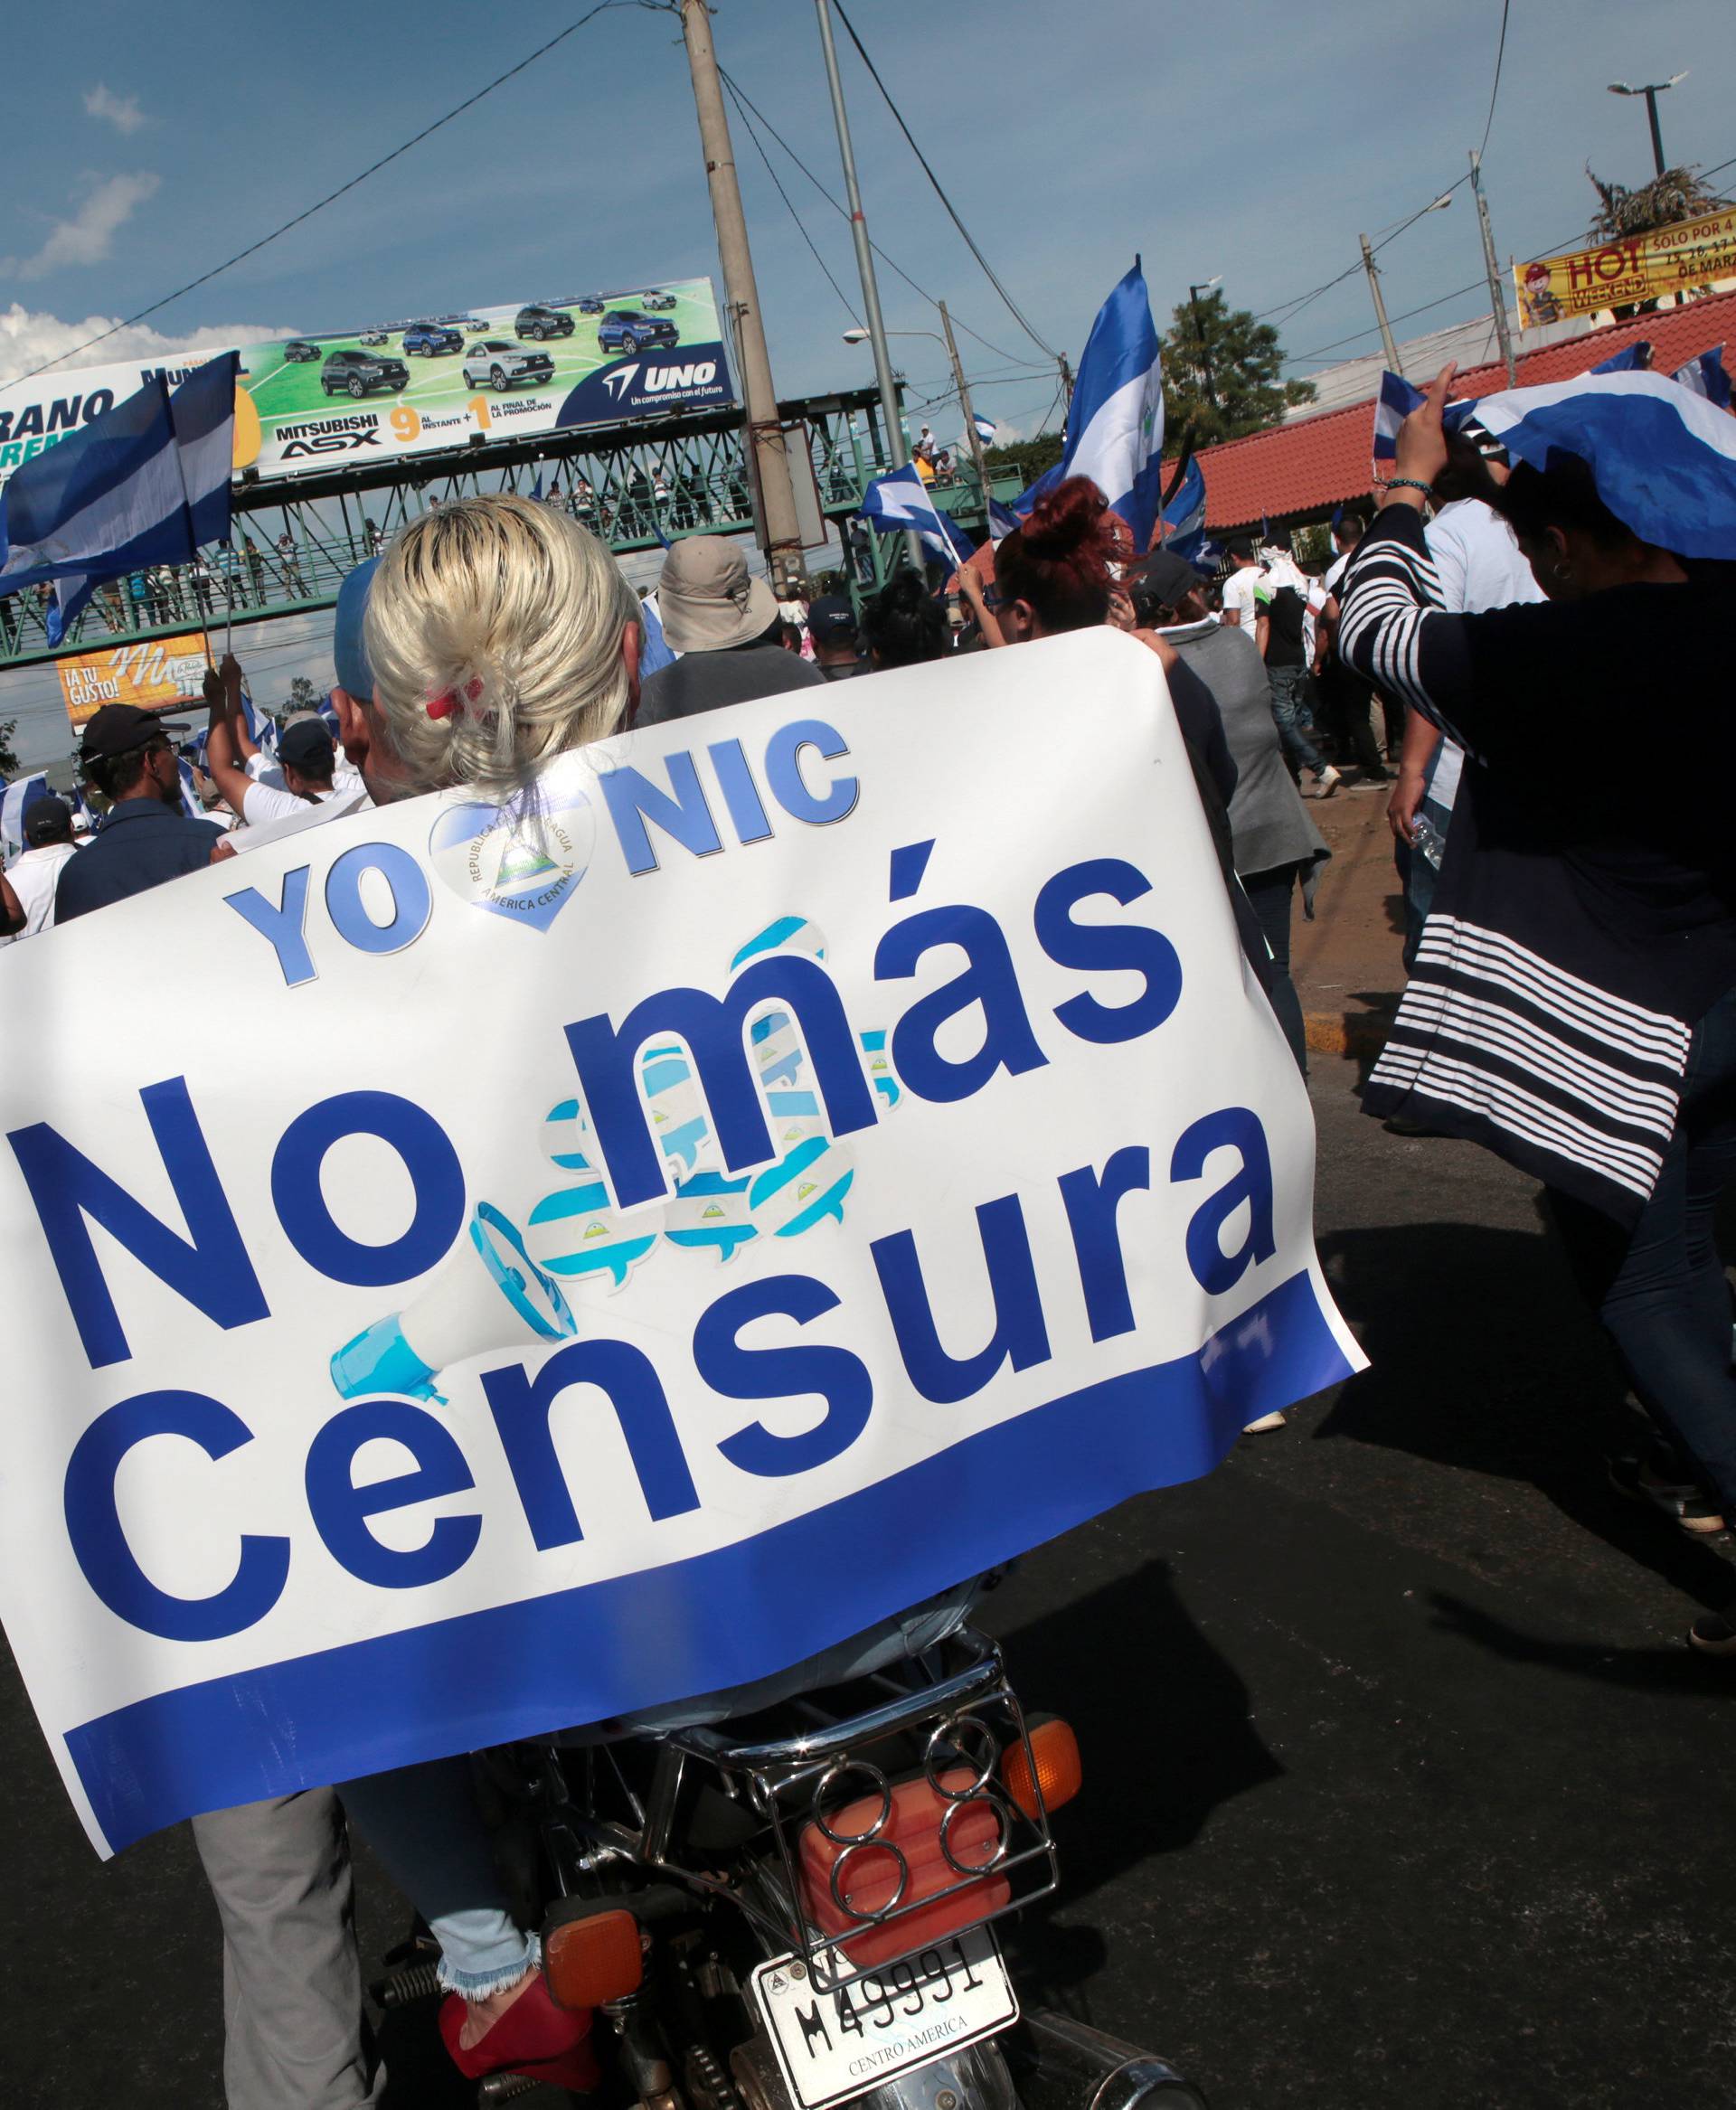 A demonstrator holds a banner reading "No more censorship" during a protest against police violence and the government of Nicaraguan President Daniel Ortega in Managua